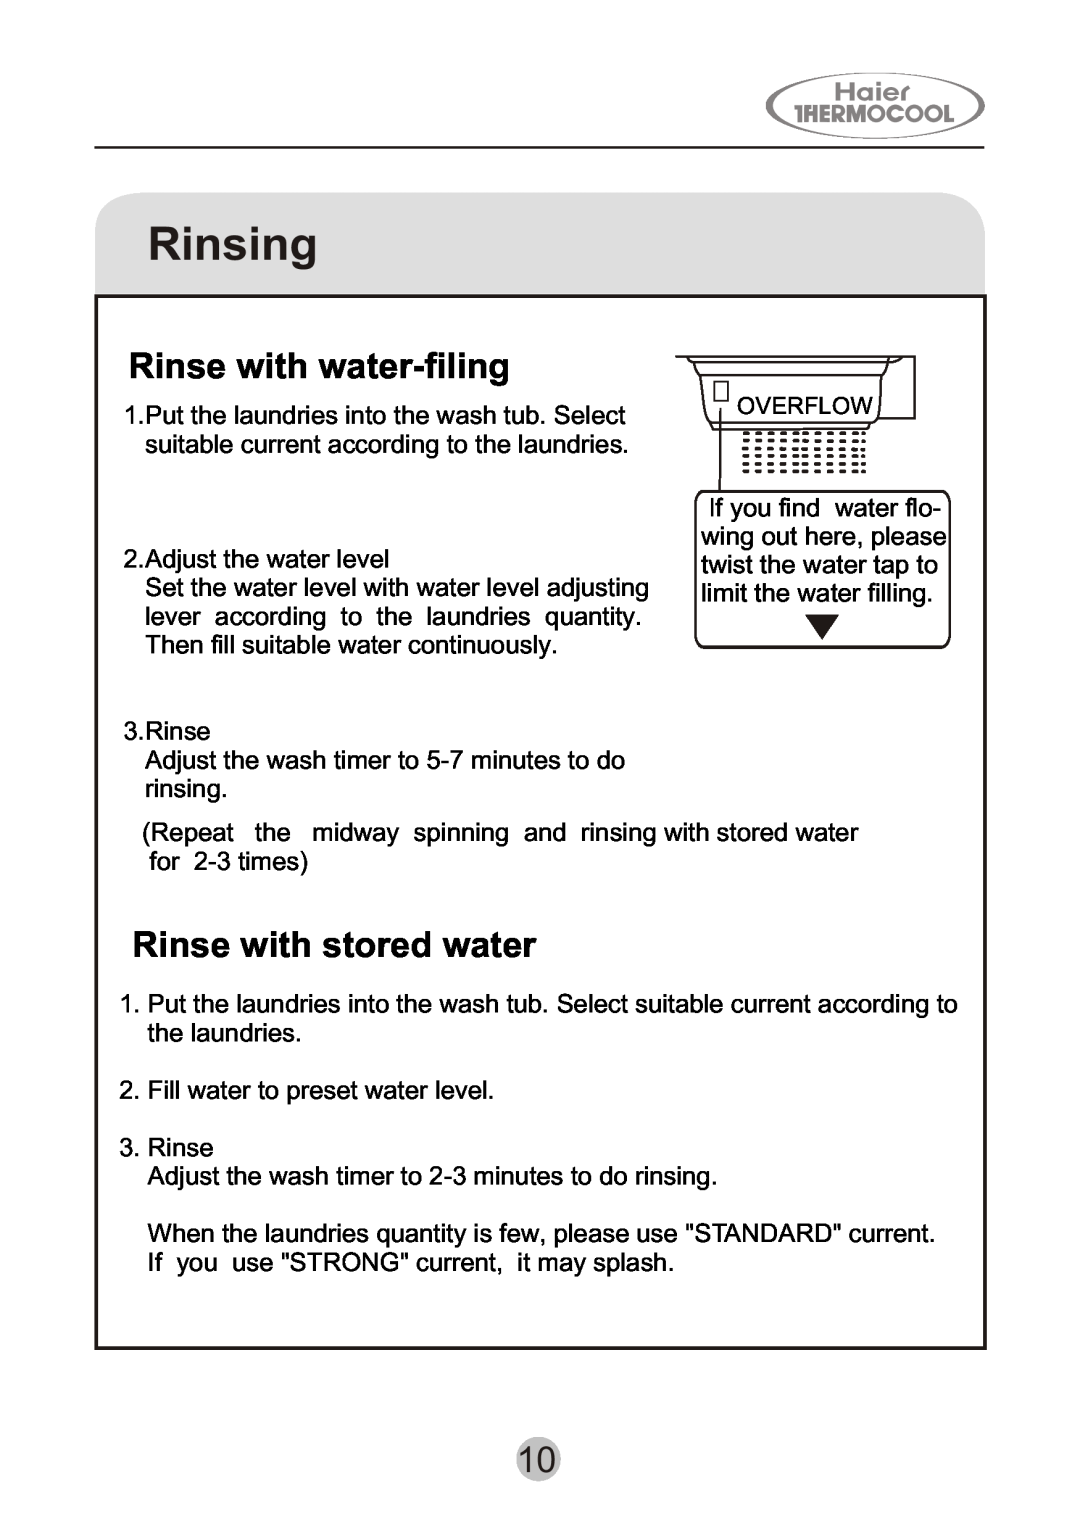 Haier HWM130-0523S user manual Rinsing, Rinse with water-filing, Rinse with stored water 